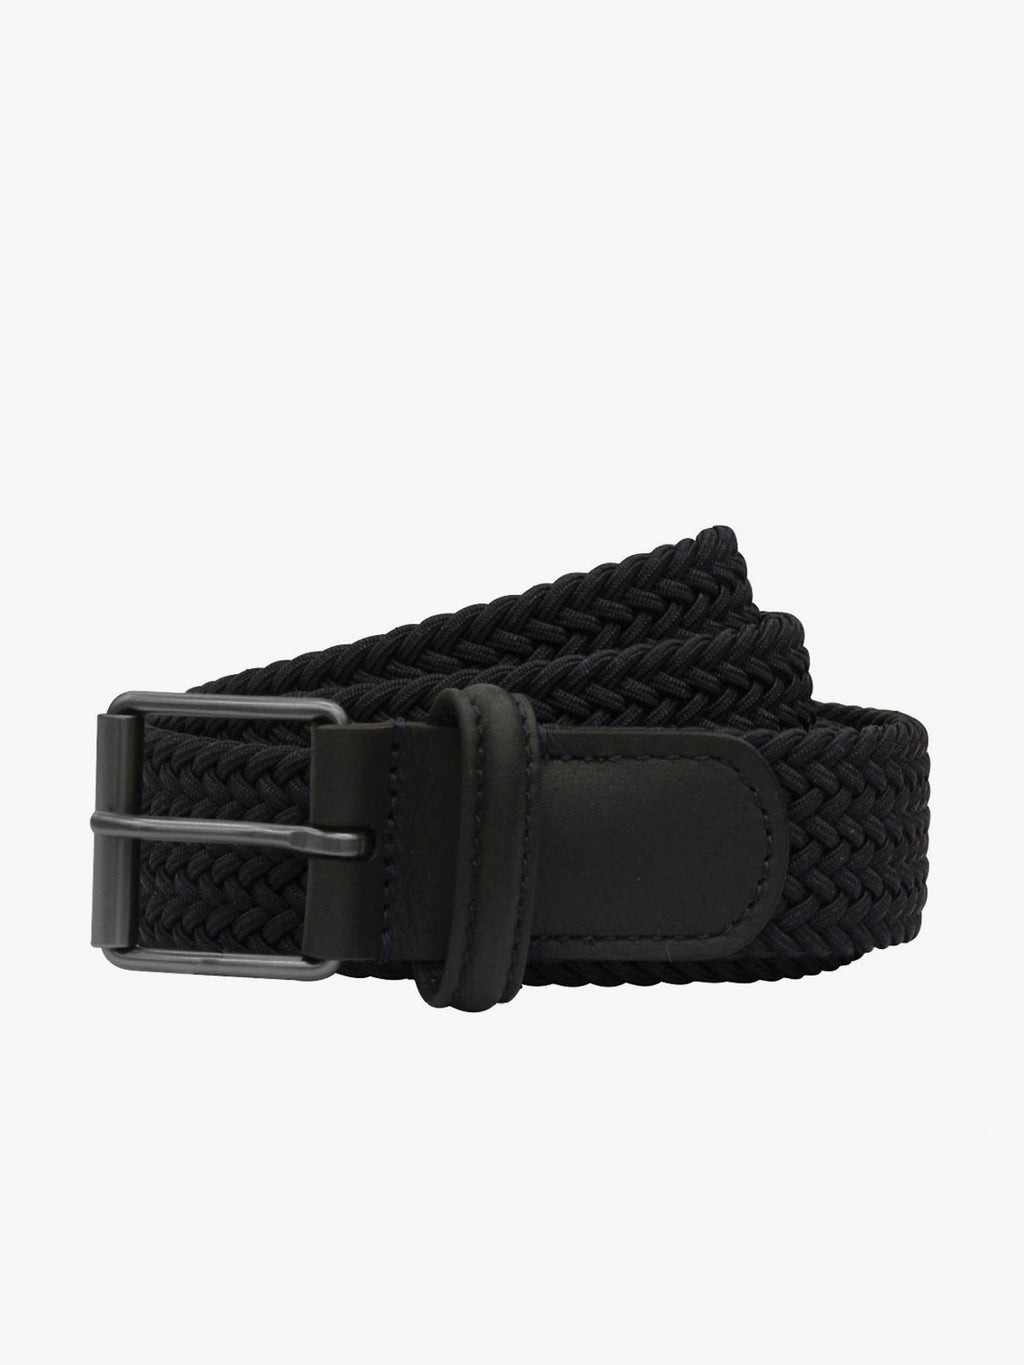 Anderson's Belt Leather-Trimmed Woven Navy Blue